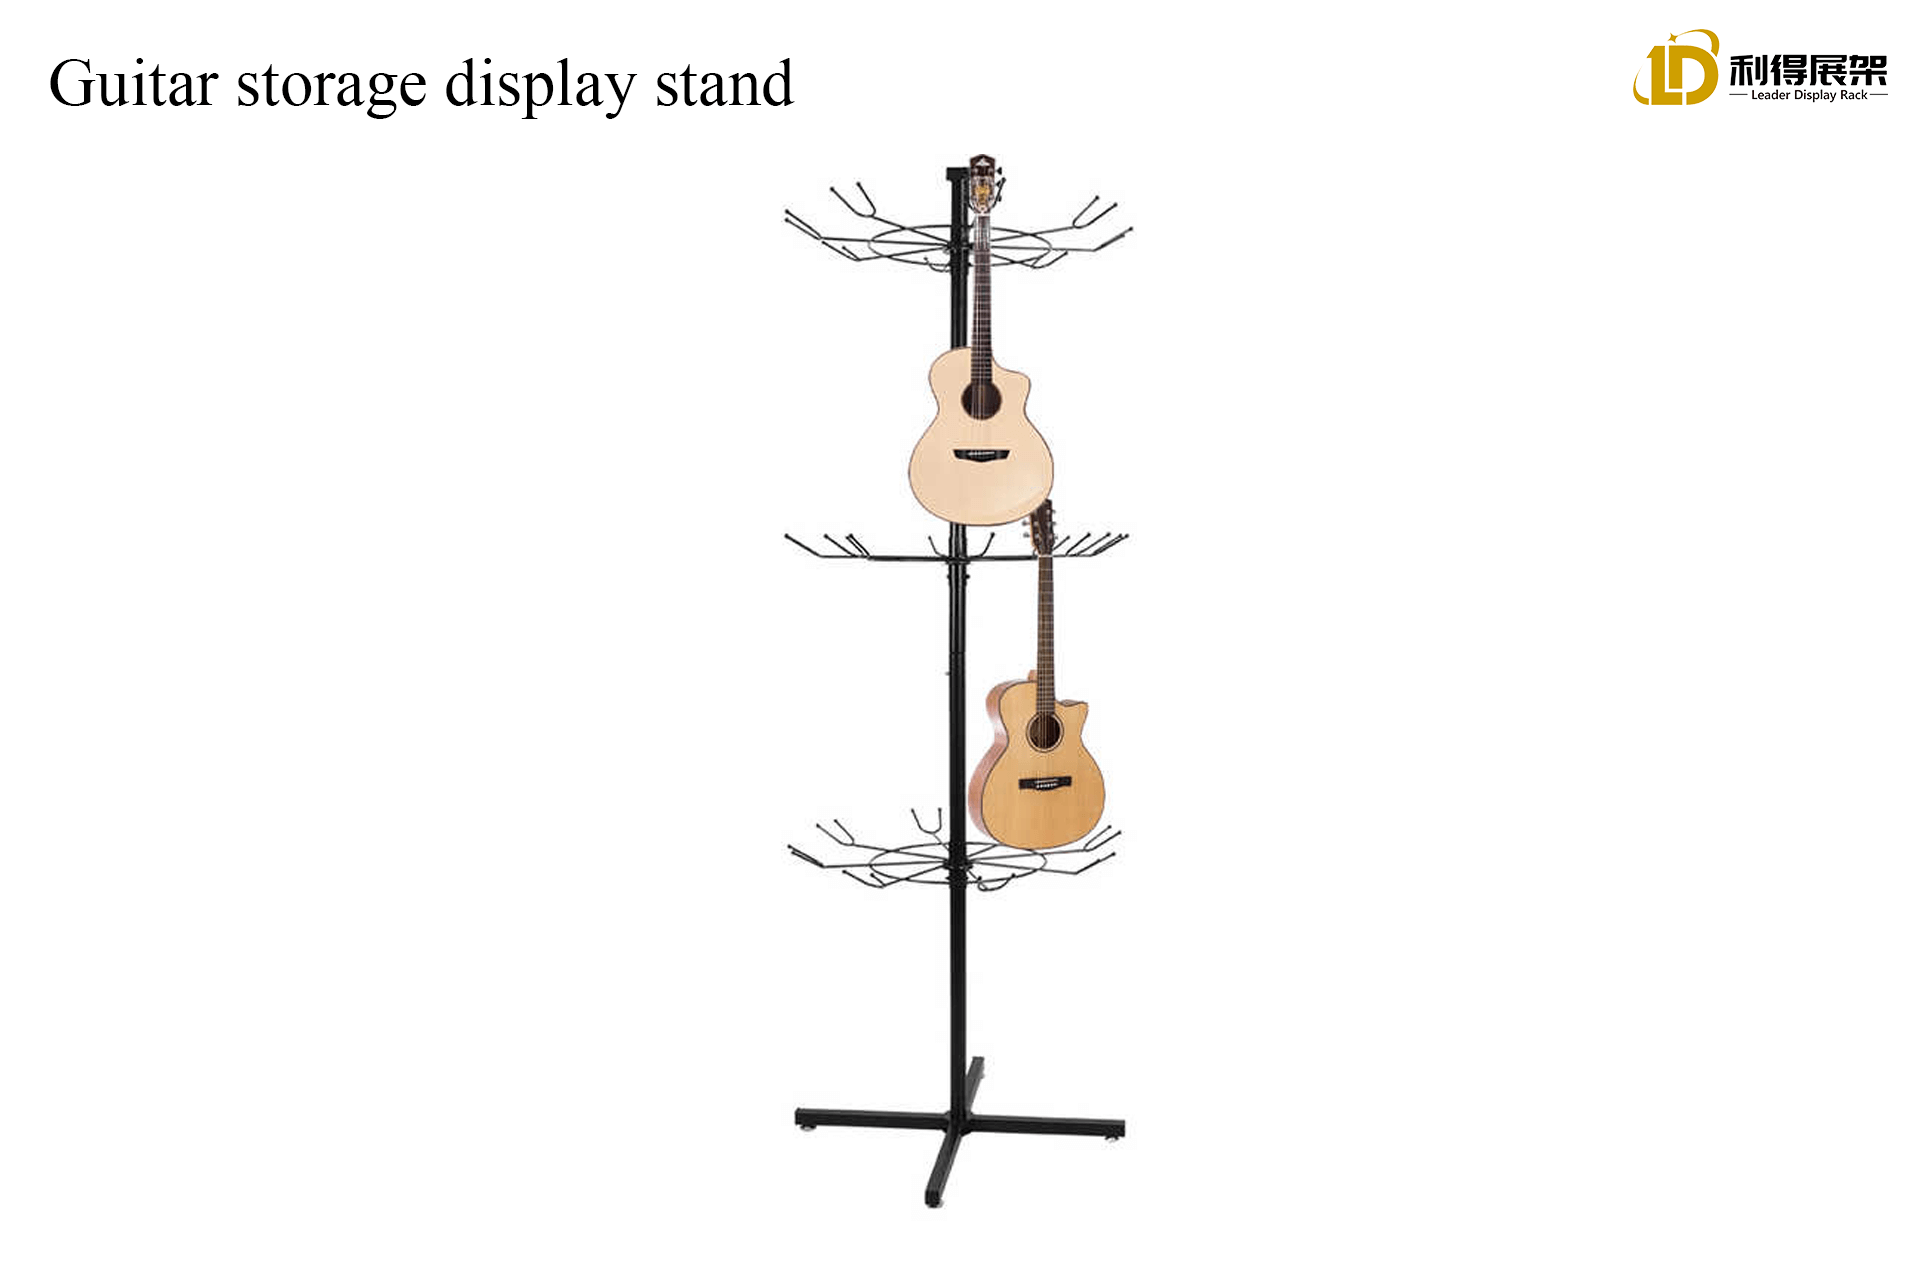 Show The Charm of Music, Guitar Storage Display Stand Personalized Design